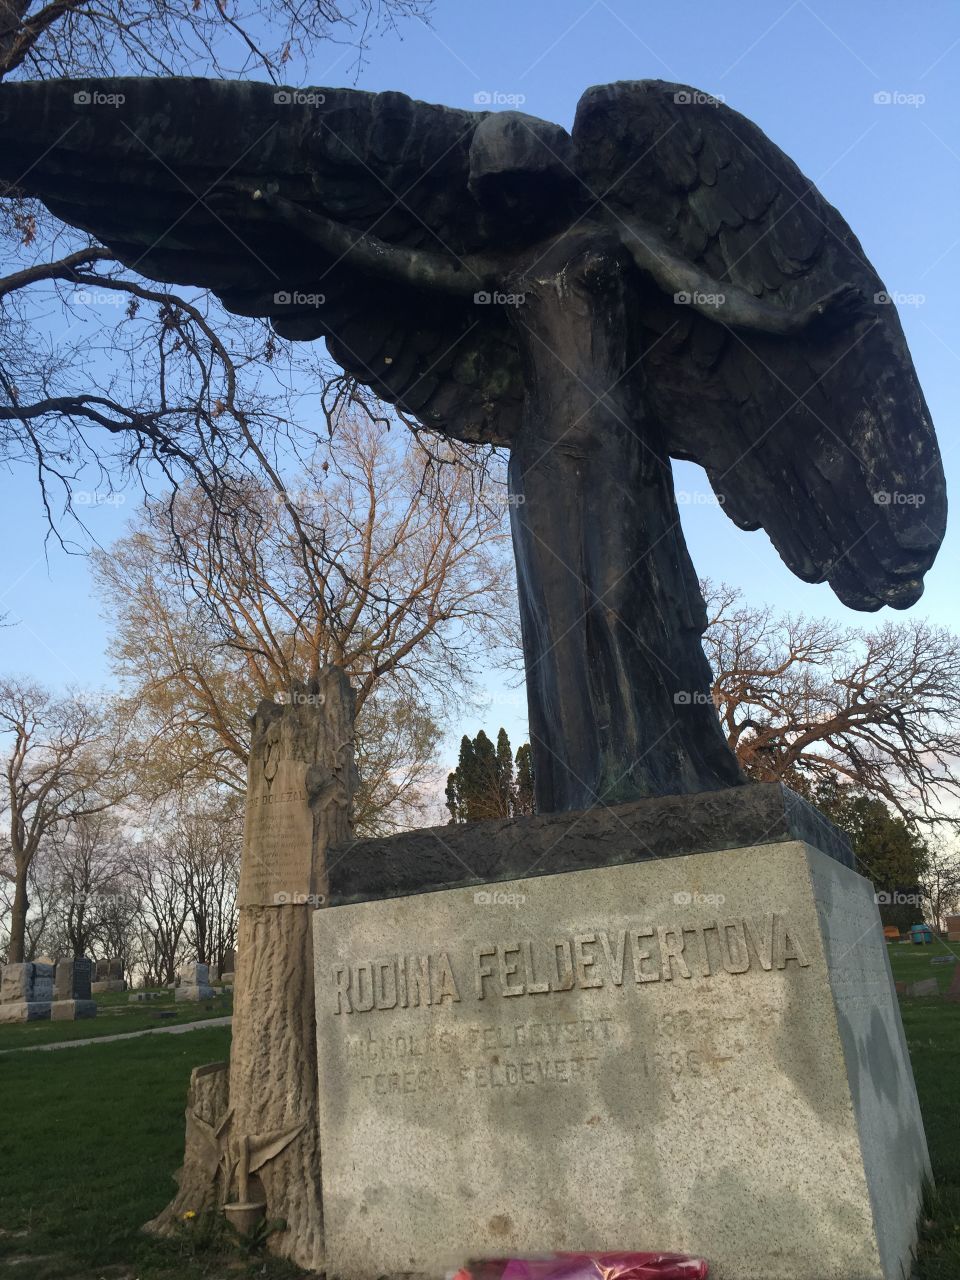 Legend of Teresa Dolezal Feldevert. The angel is said to be haunted, have deadly legends, and has no death date engraved on it. Located in Oakland Cemetery in Iowa City, IA.   